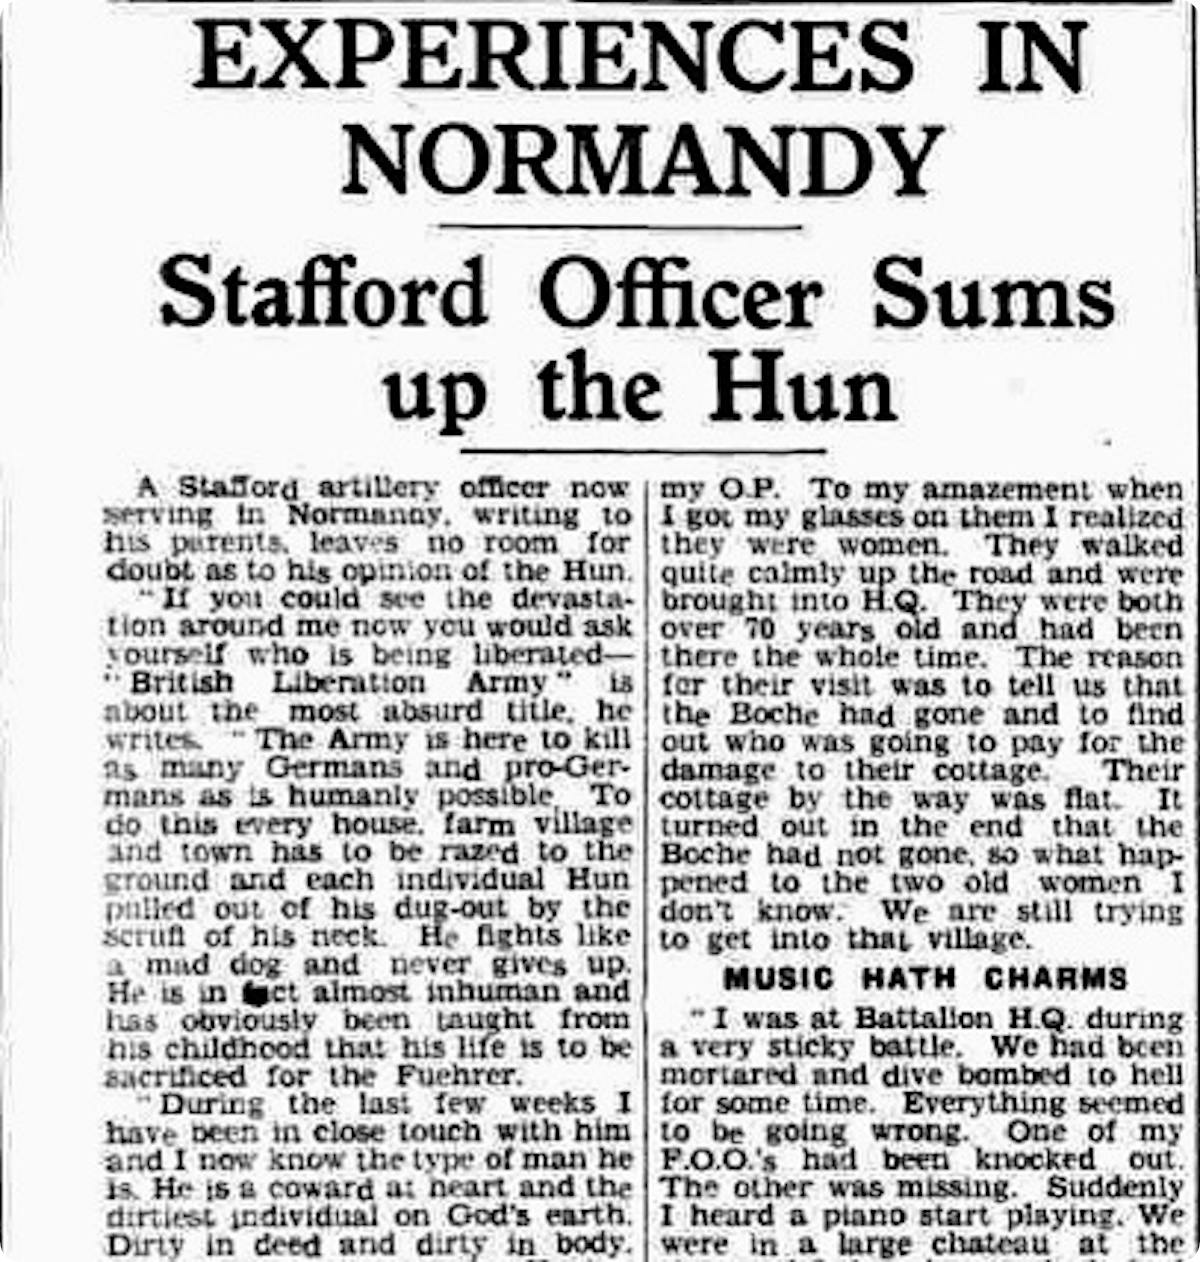 Staffordshire officers at D-Day